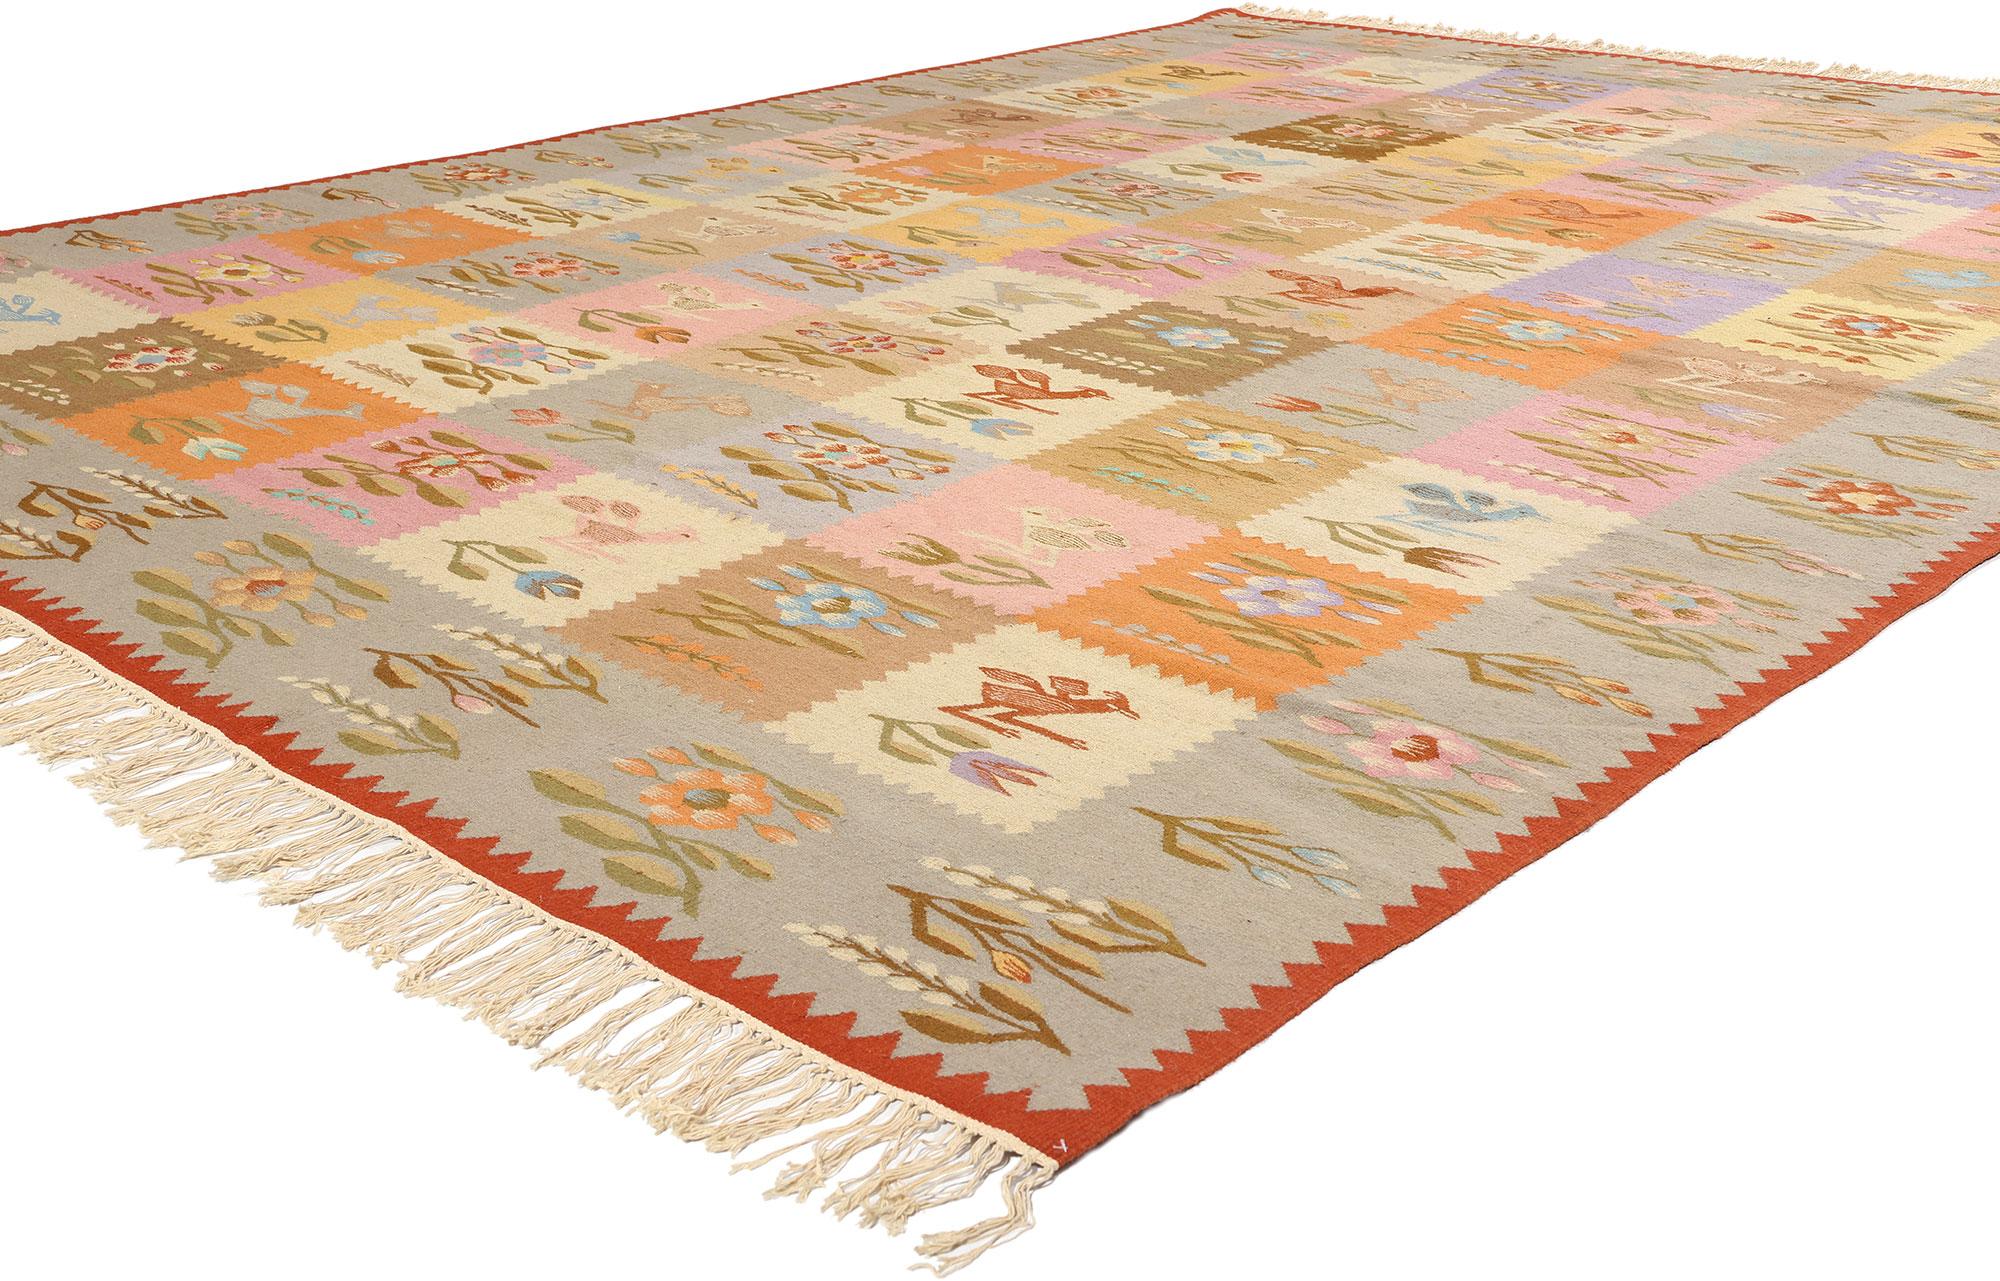 78019 Vintage Romanian Bessarabian Kilim Rug, 08'11 x 12'00. Romanian kilim rugs are traditional flat-woven rugs crafted using wool, cotton, or a blend of both, featuring vibrant colors and geometric patterns inspired by nature, folklore, and